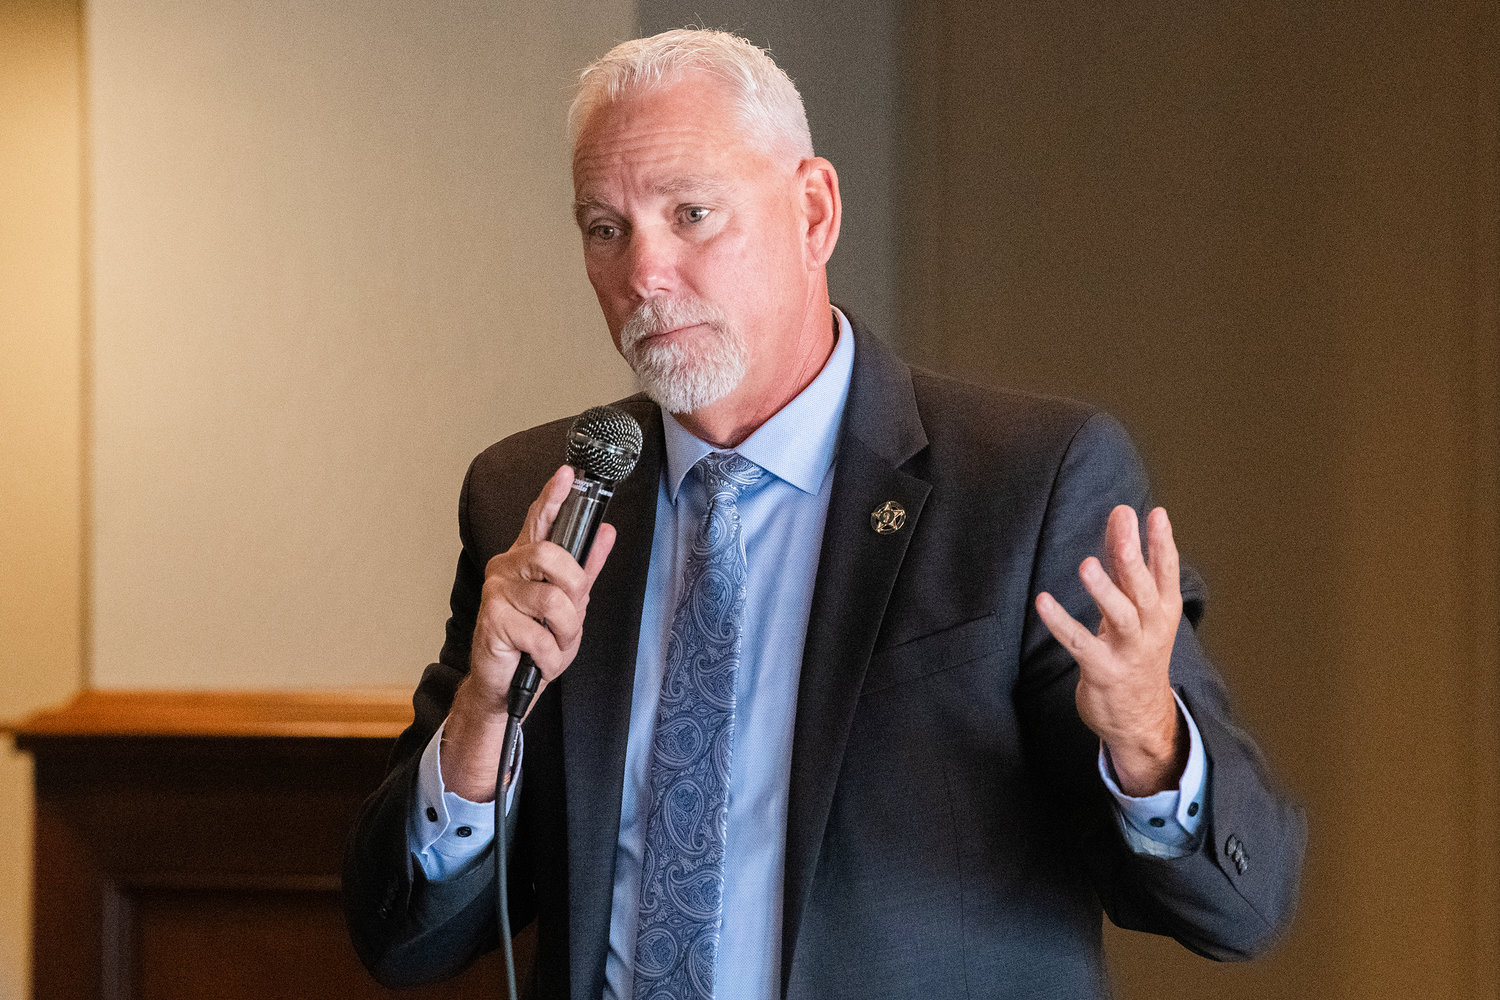 Rob Snaza talks about the Lewis County Sheriff’s Office during a debate forum held at O’Blarney’s in Centralia in October 2022.